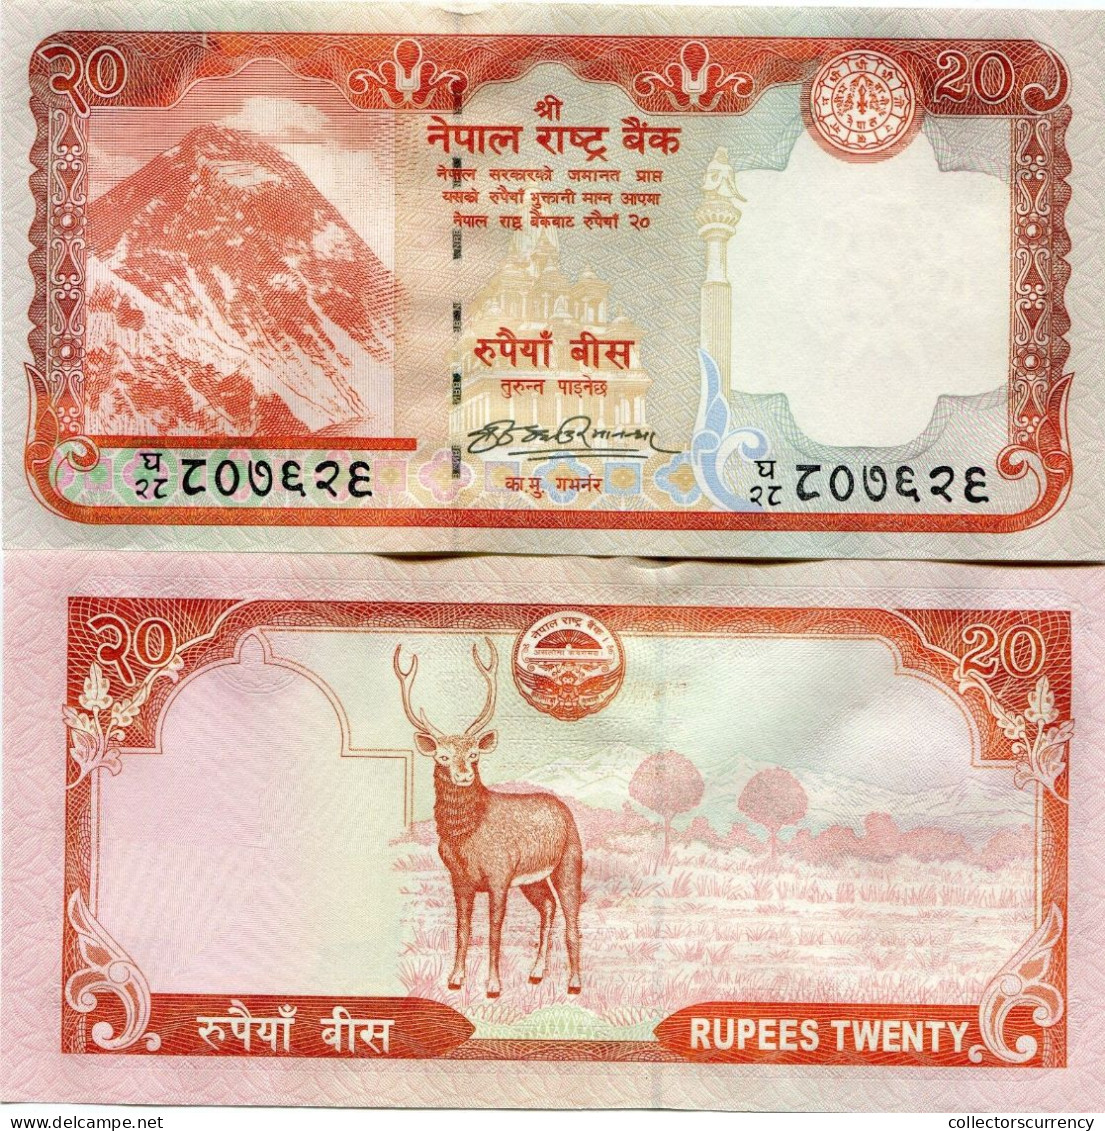 Nepal 2009 P62 20 Rupees Banknote Uncirculated Paper Money X 10 Piece Lot - Nepal